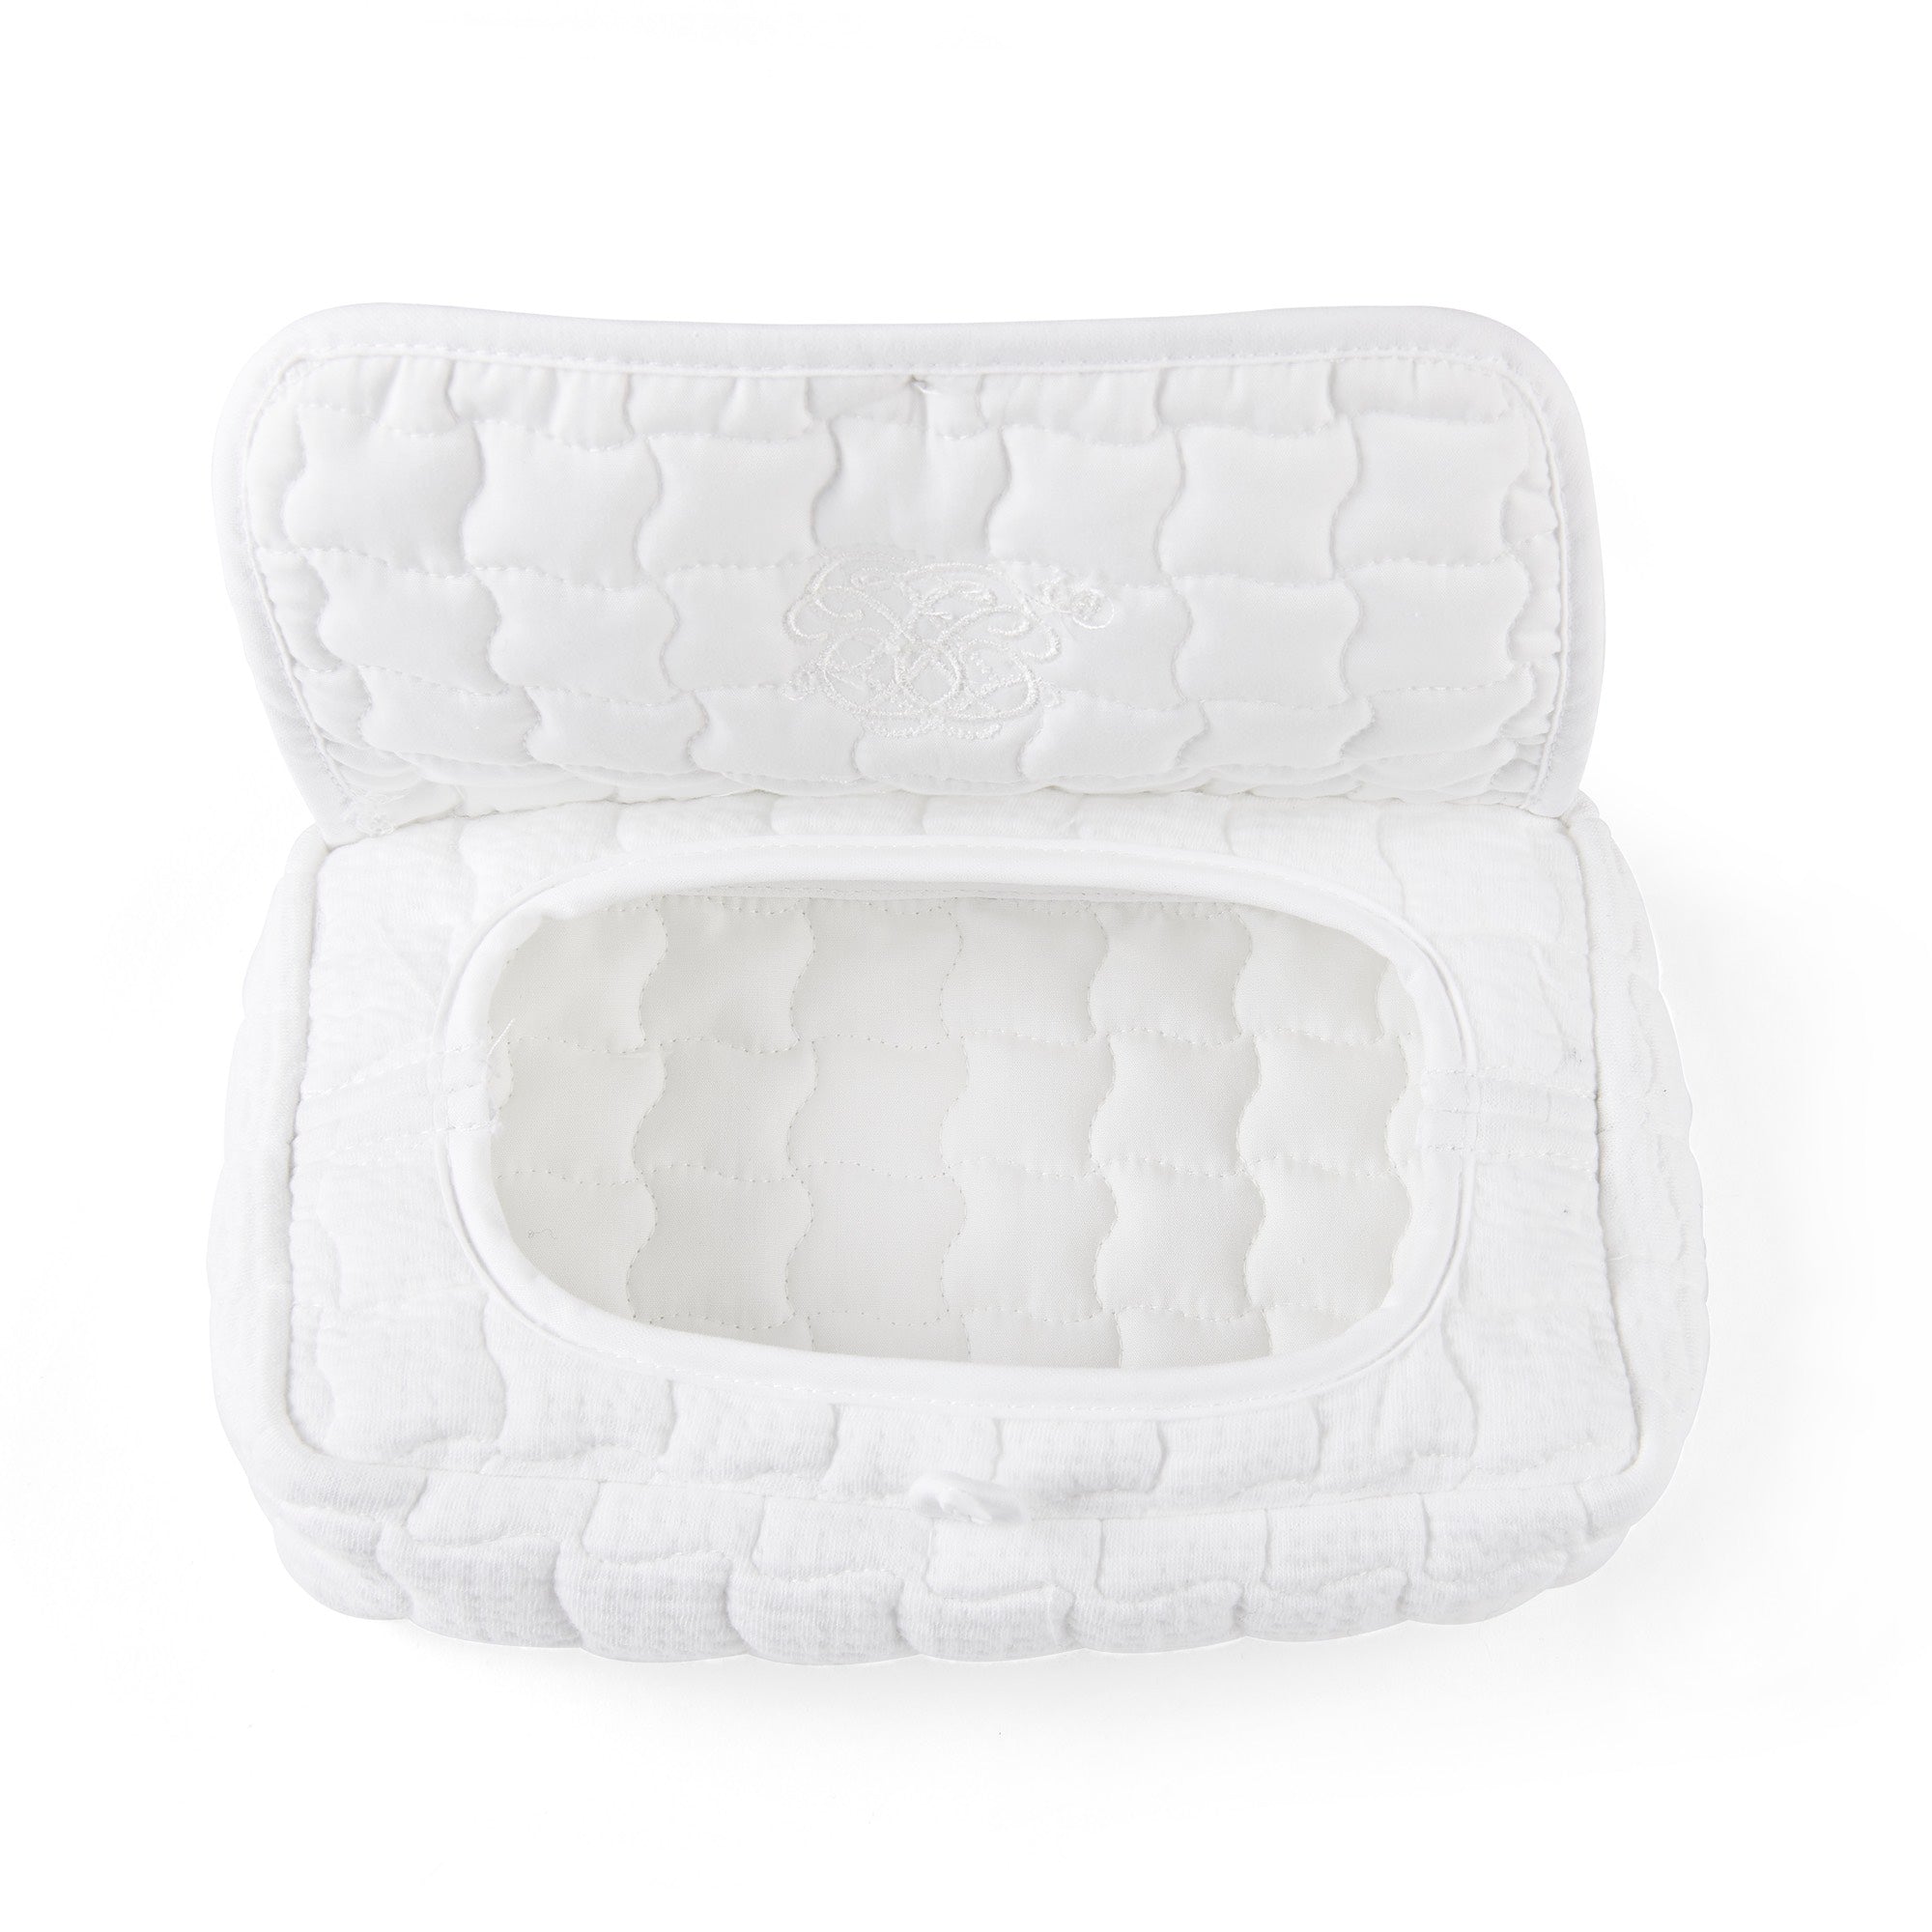 Theophile & Patachou Travel Wipes Cover - Cotton White